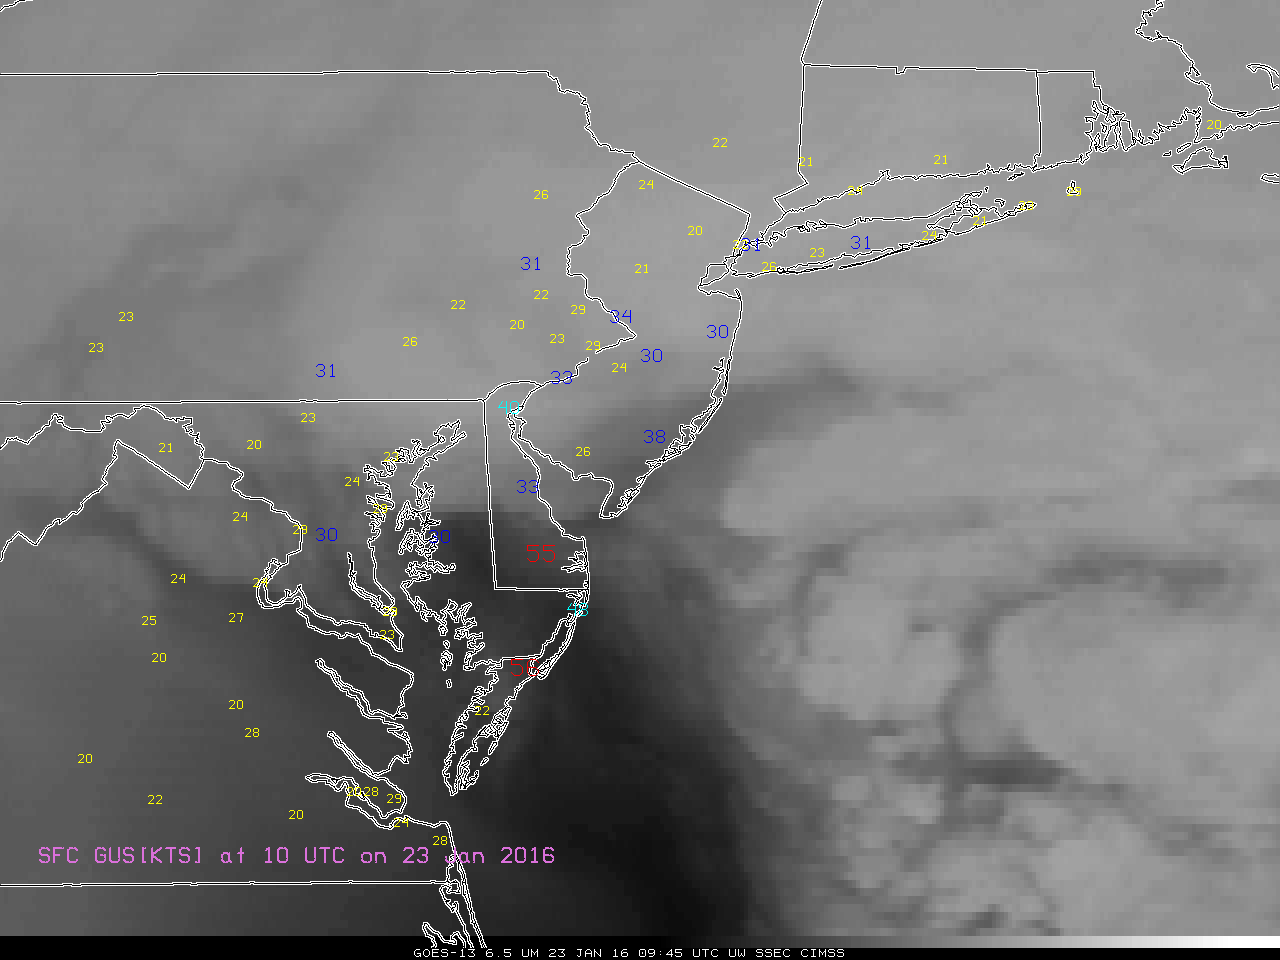 Hourly GOES-13 Infrared Water Vapor (6.5 µm) and surface reports of Wind Gusts (knots) [click to play animation]